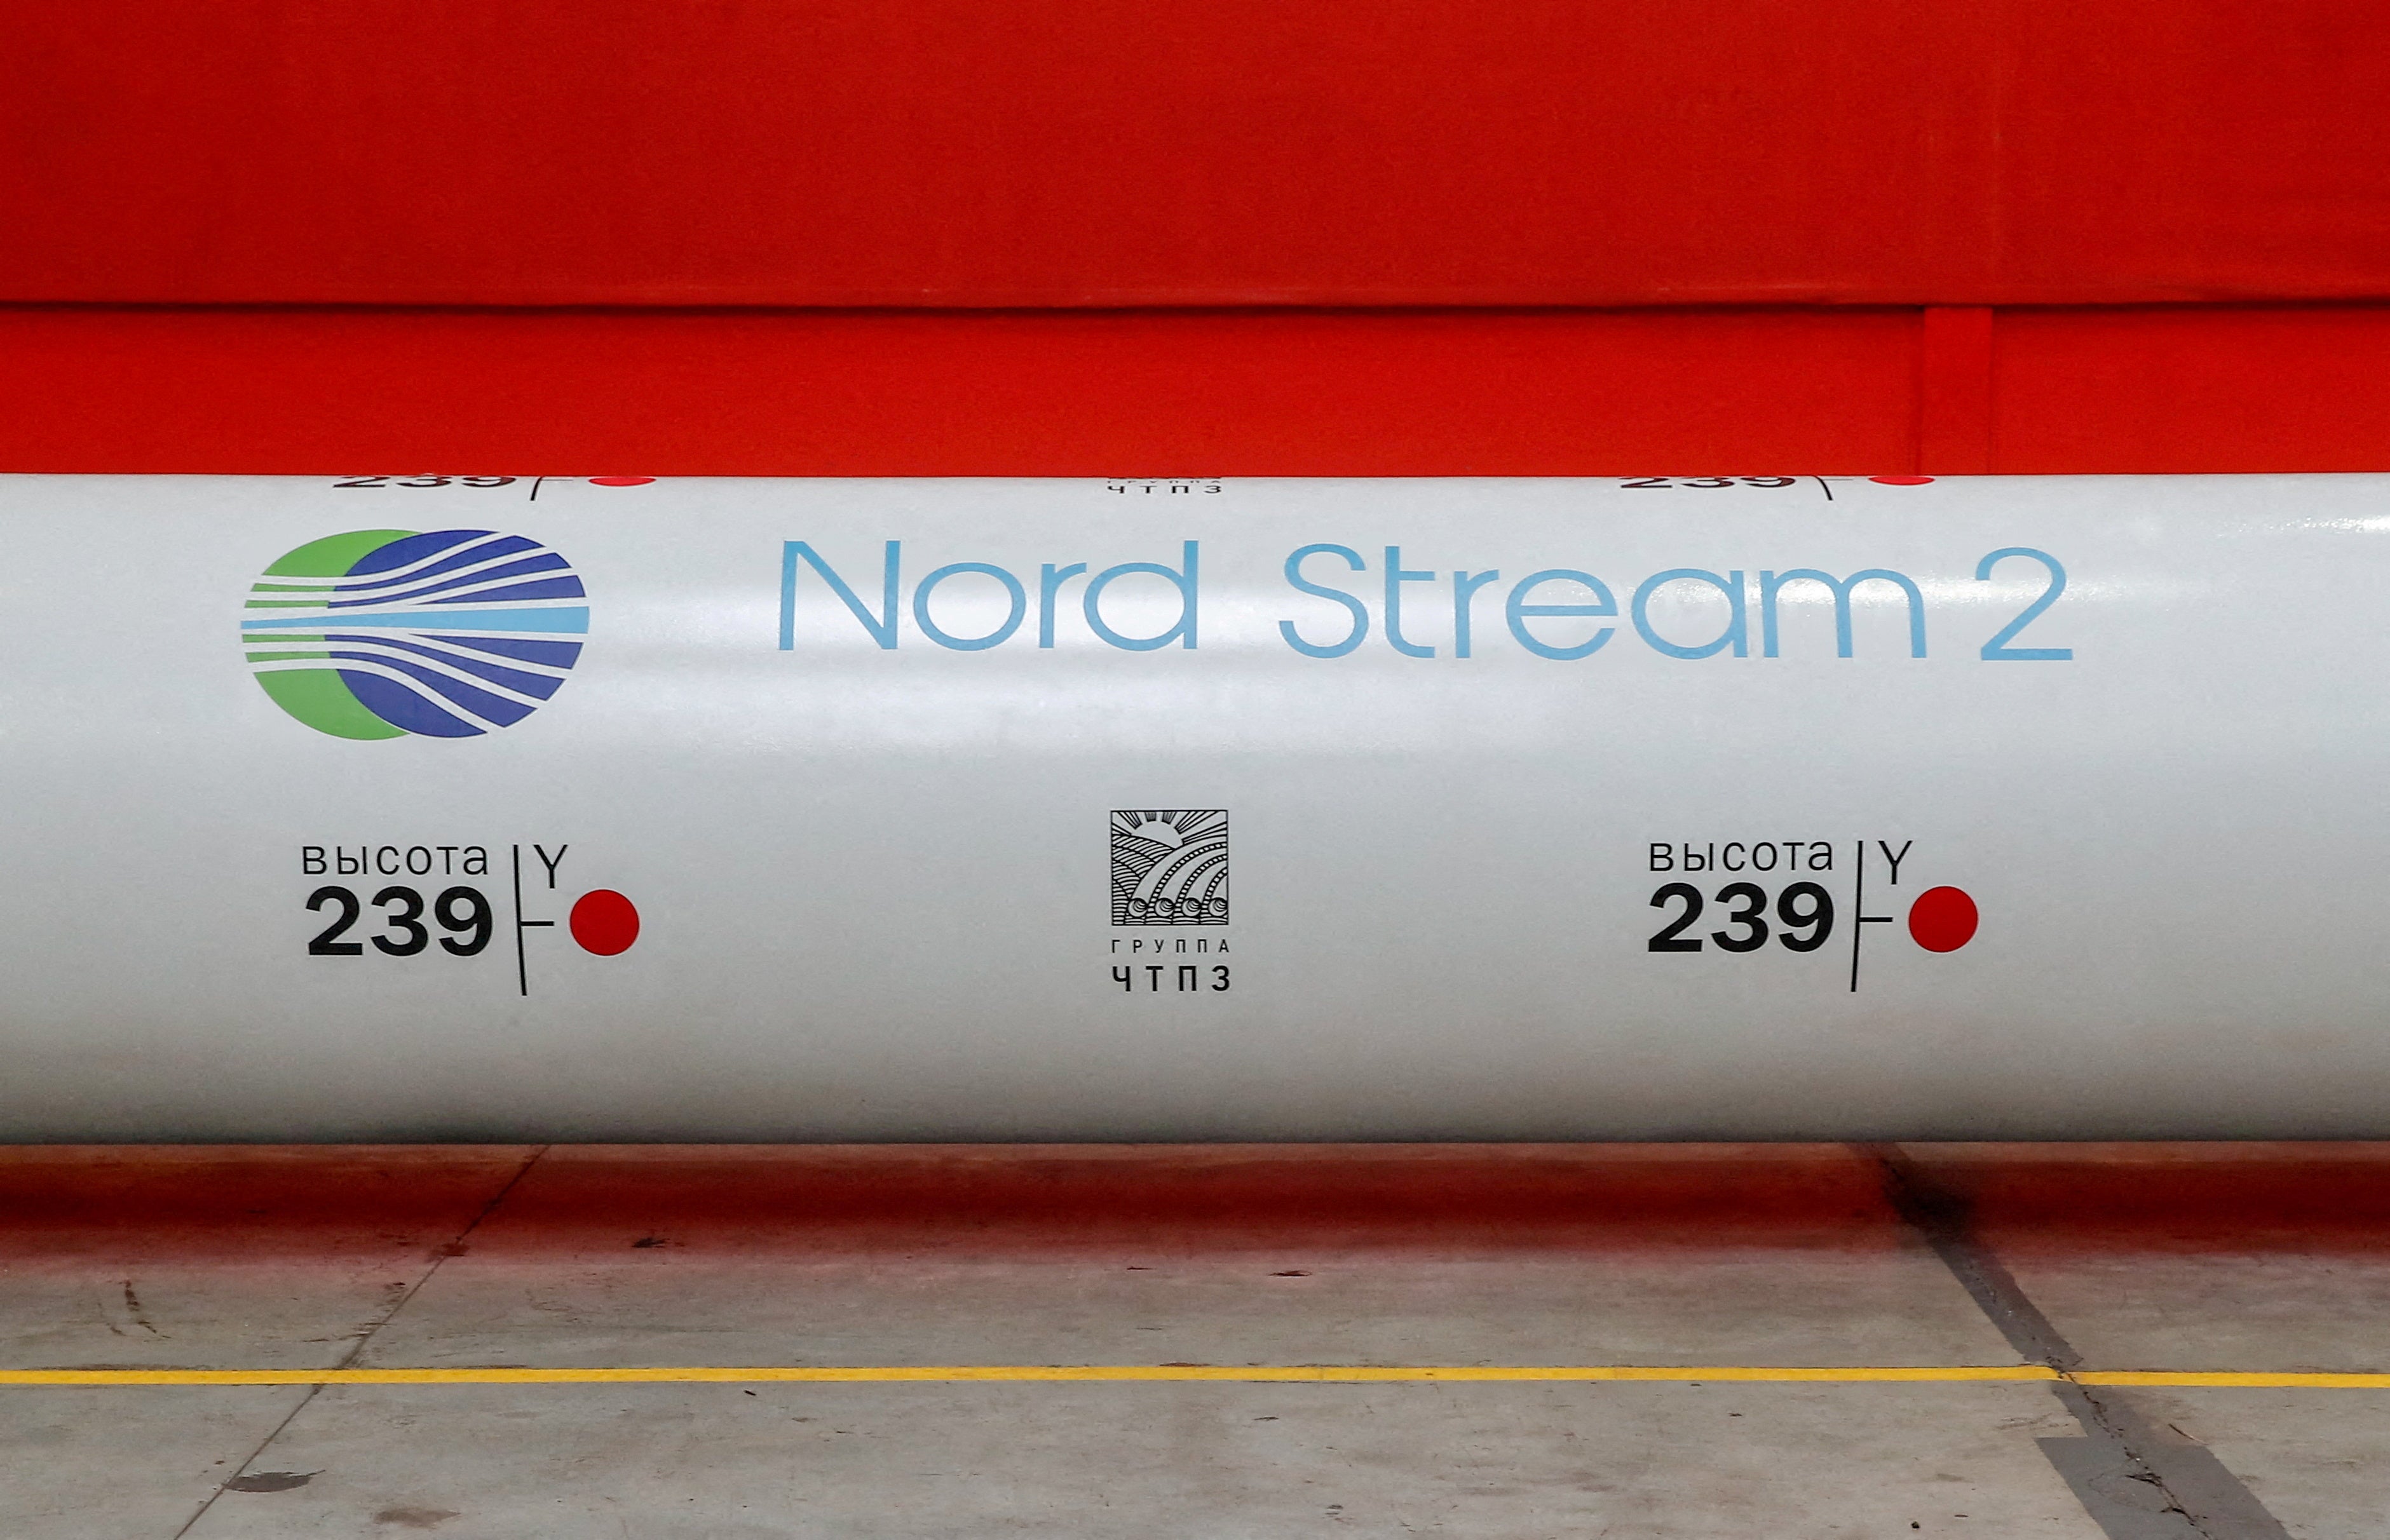 File photo: The logo of the Nord Stream 2 gas pipeline project is seen on a large-diameter pipe in Chelyabinsk, Russia, 26 February 2020